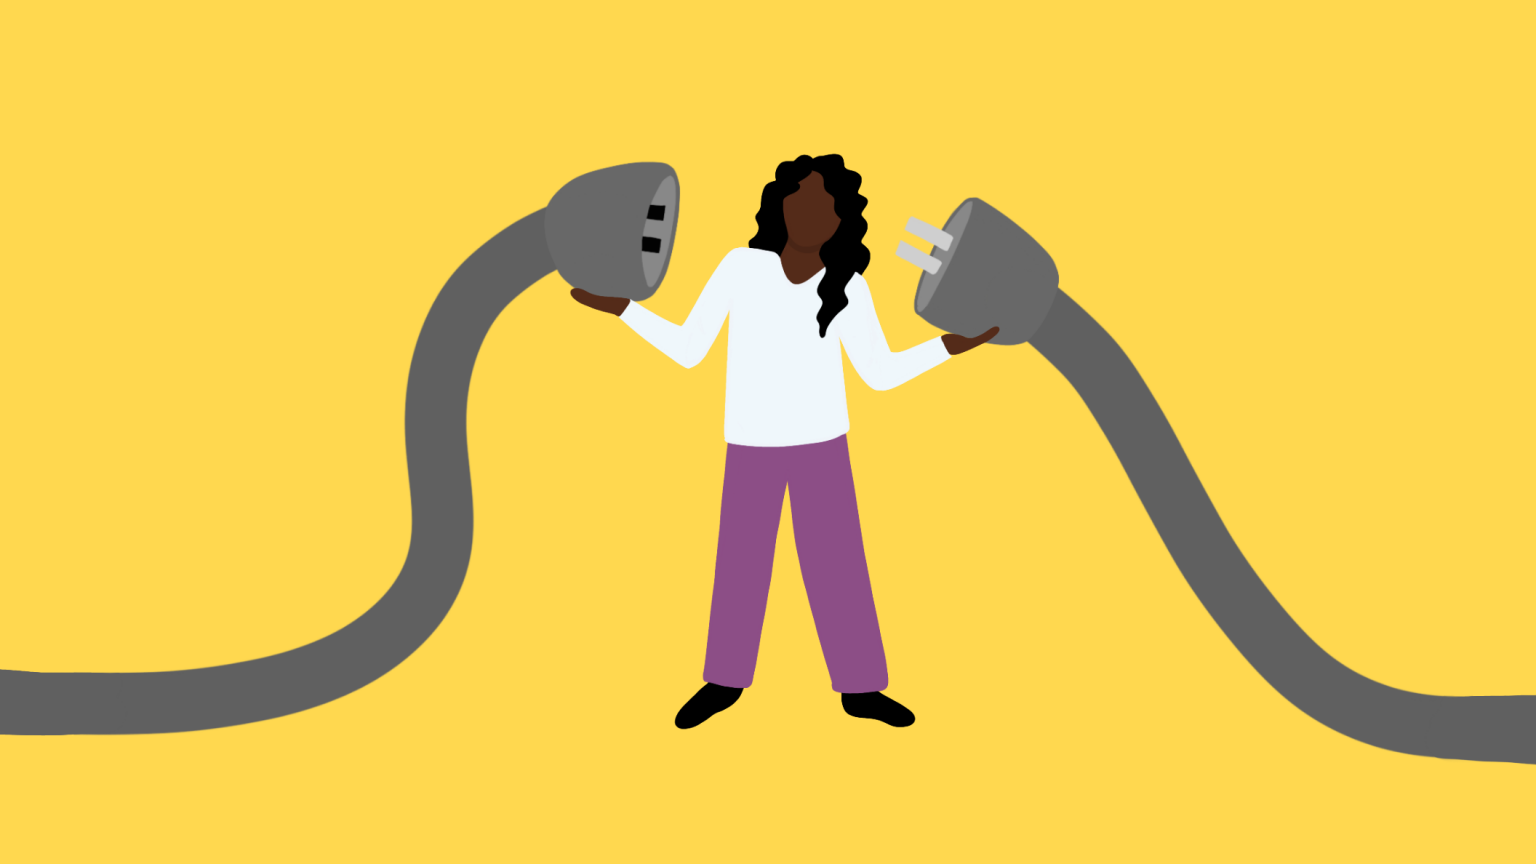 illustration of person holding a power cord